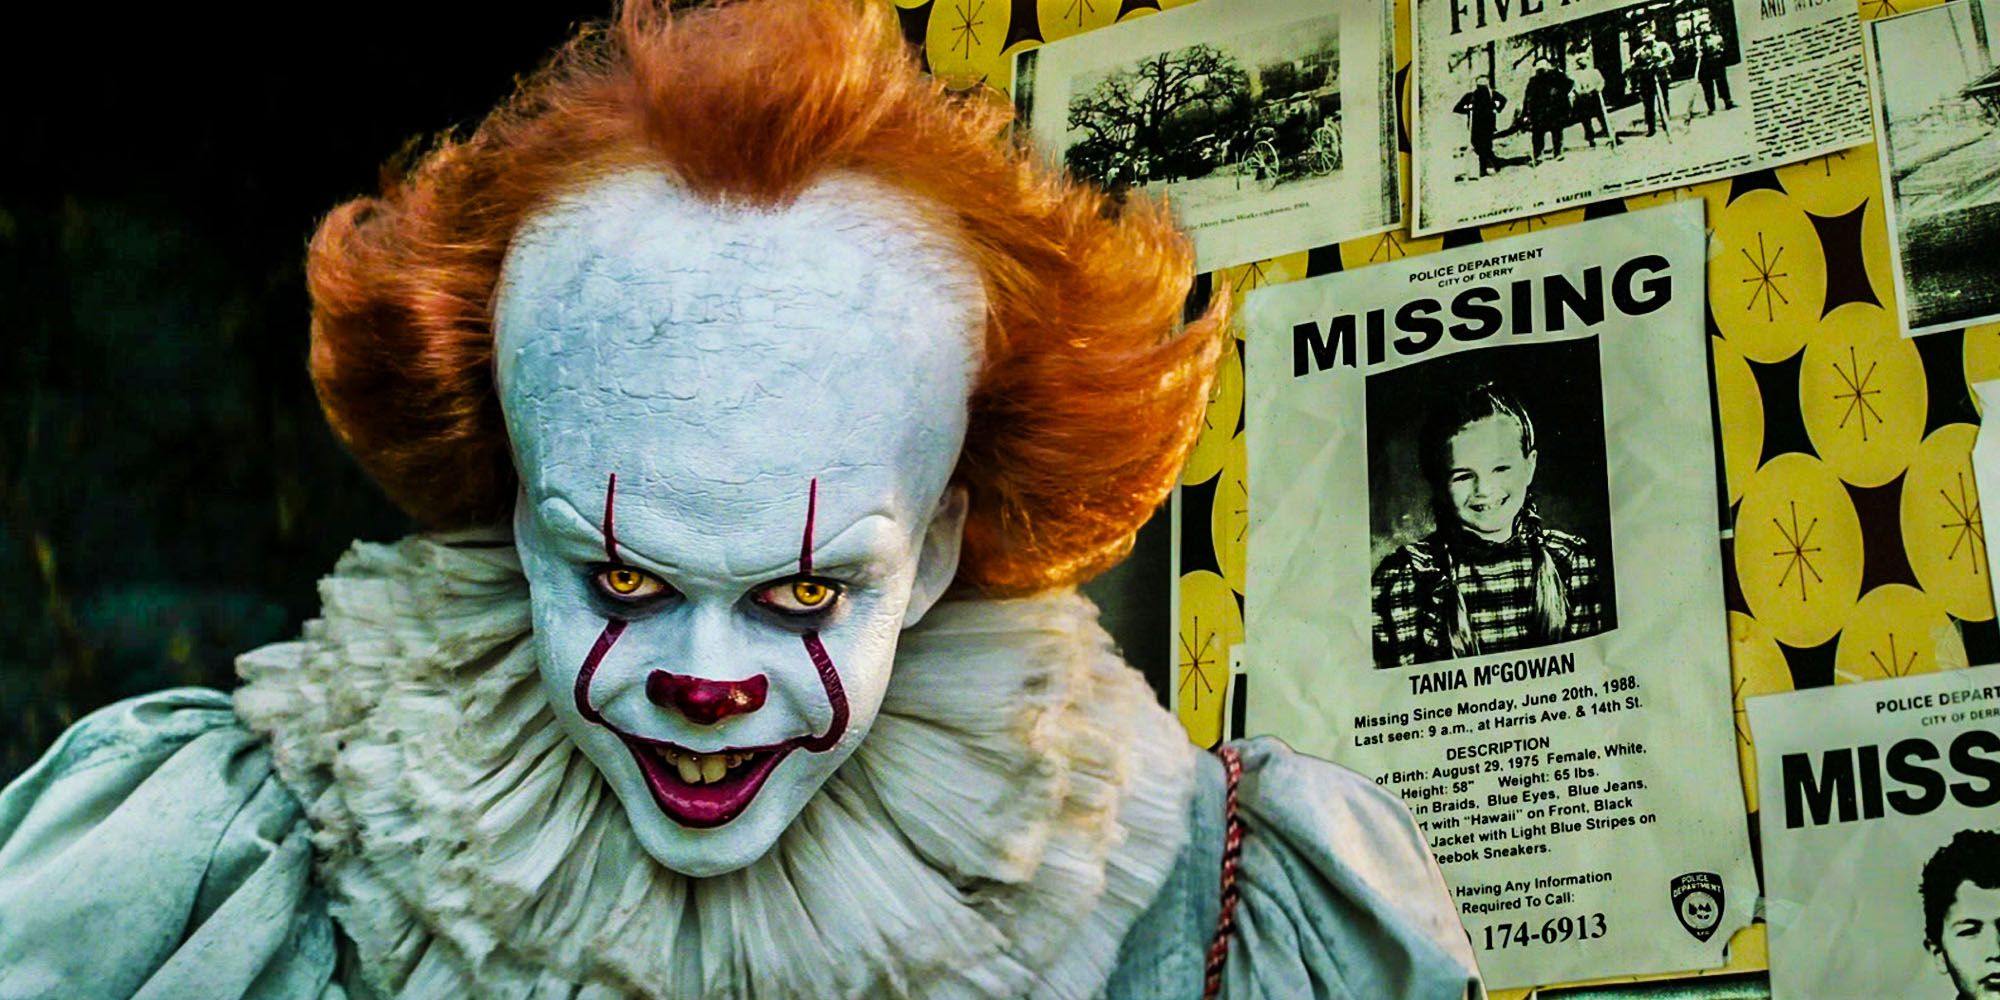 It why Derry is cursed pennywise